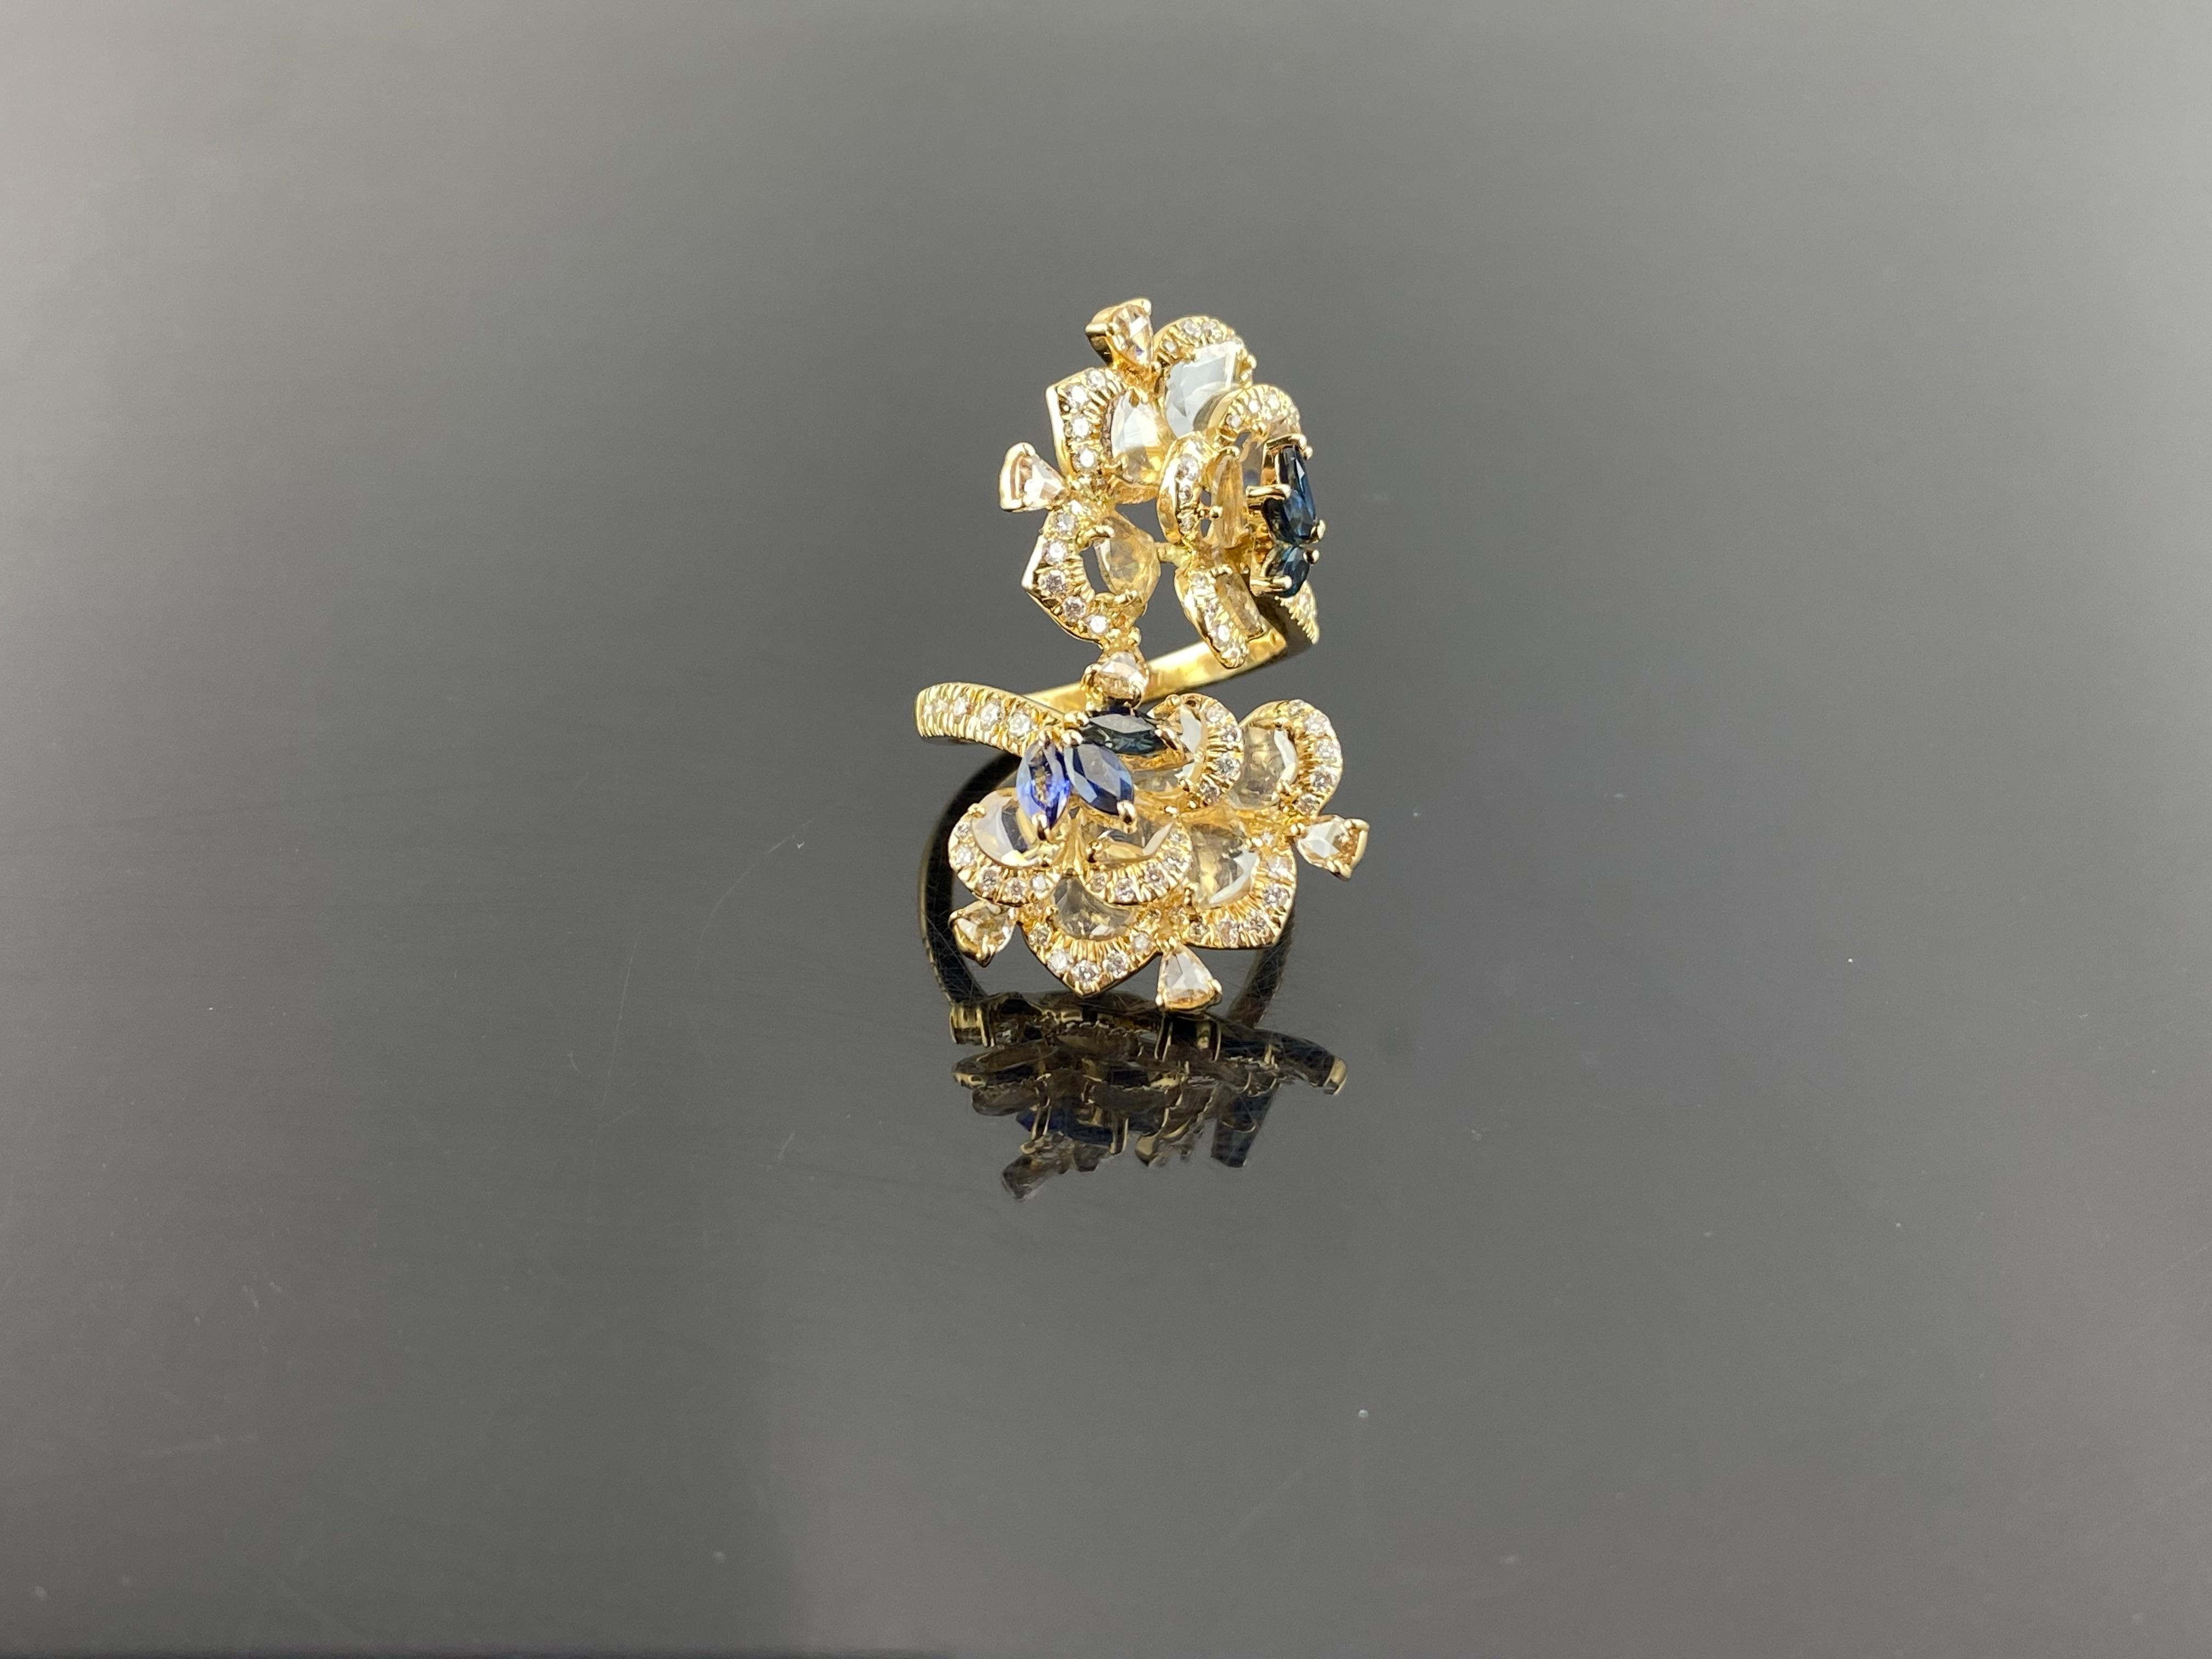 A beautifully handcrafted, 1.18 carat Blue Sapphire and 2.39 carat rose cut Diamond ring, set in solid 18K Yellow Gold. Currently sized at US 6.5, can be resized. 
Please feel free to message us for more information. 
We provide free shipping, and